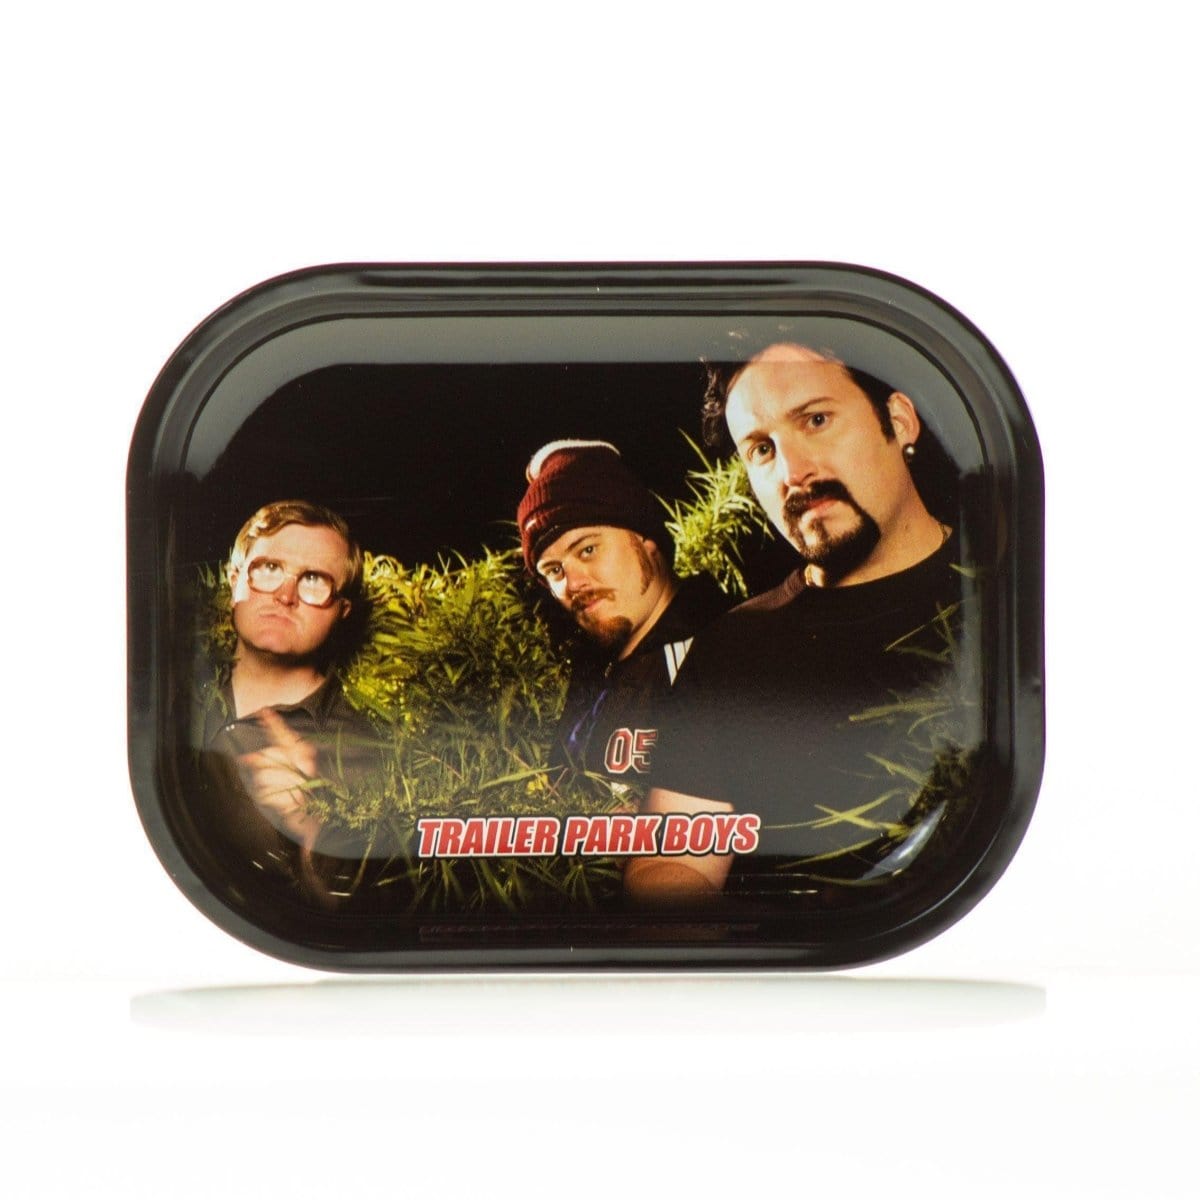 Trailer Park Boys Rolling Tray Small Clippings Rolling Tray